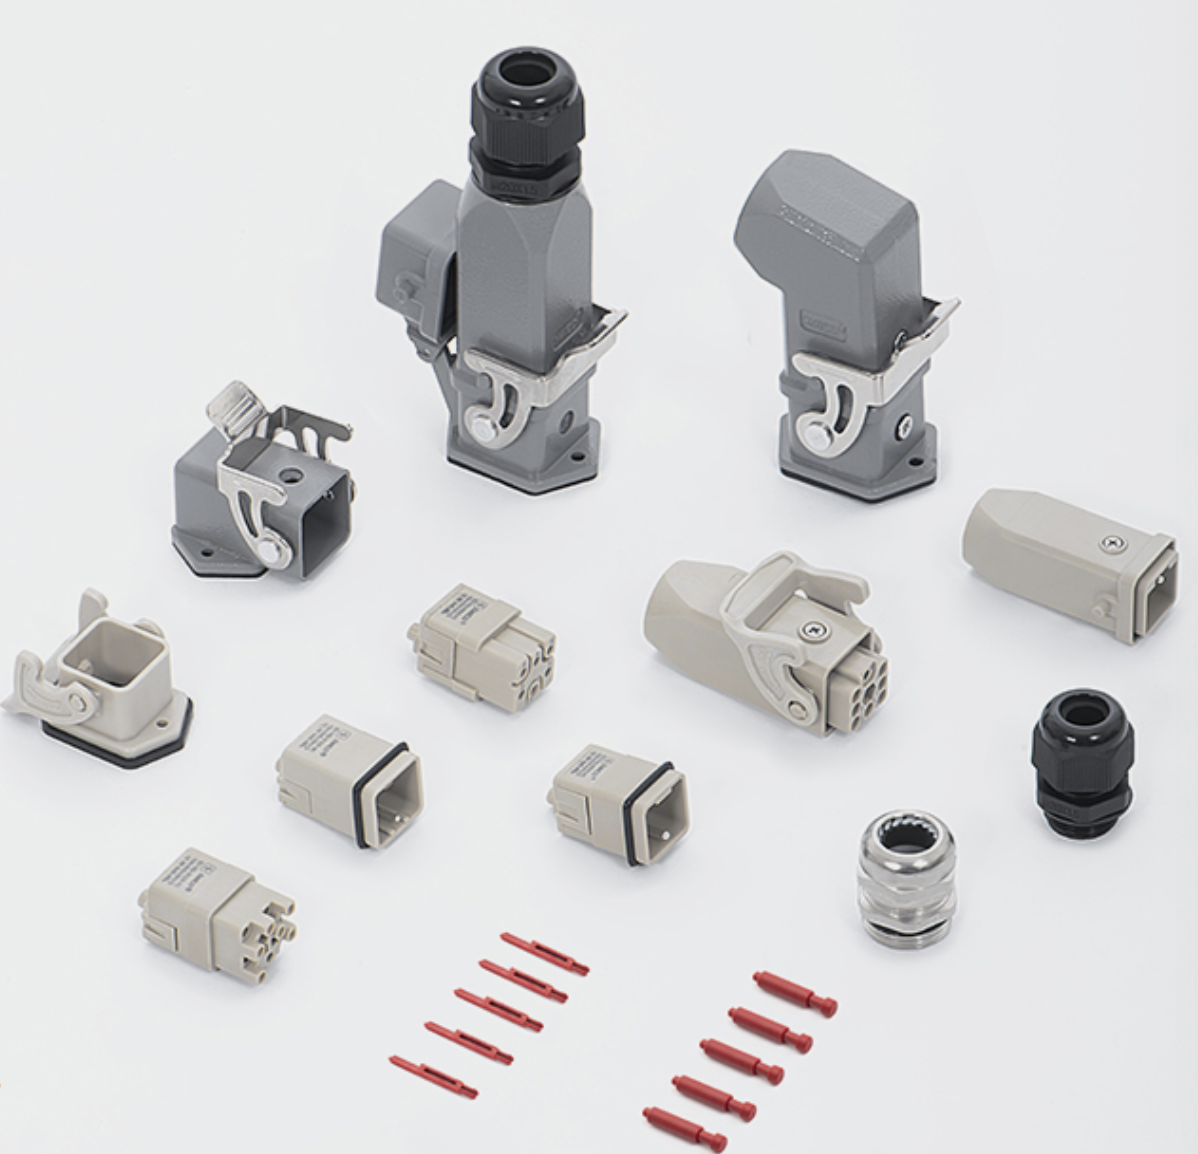 SMICO heavy duty connectors has another new member